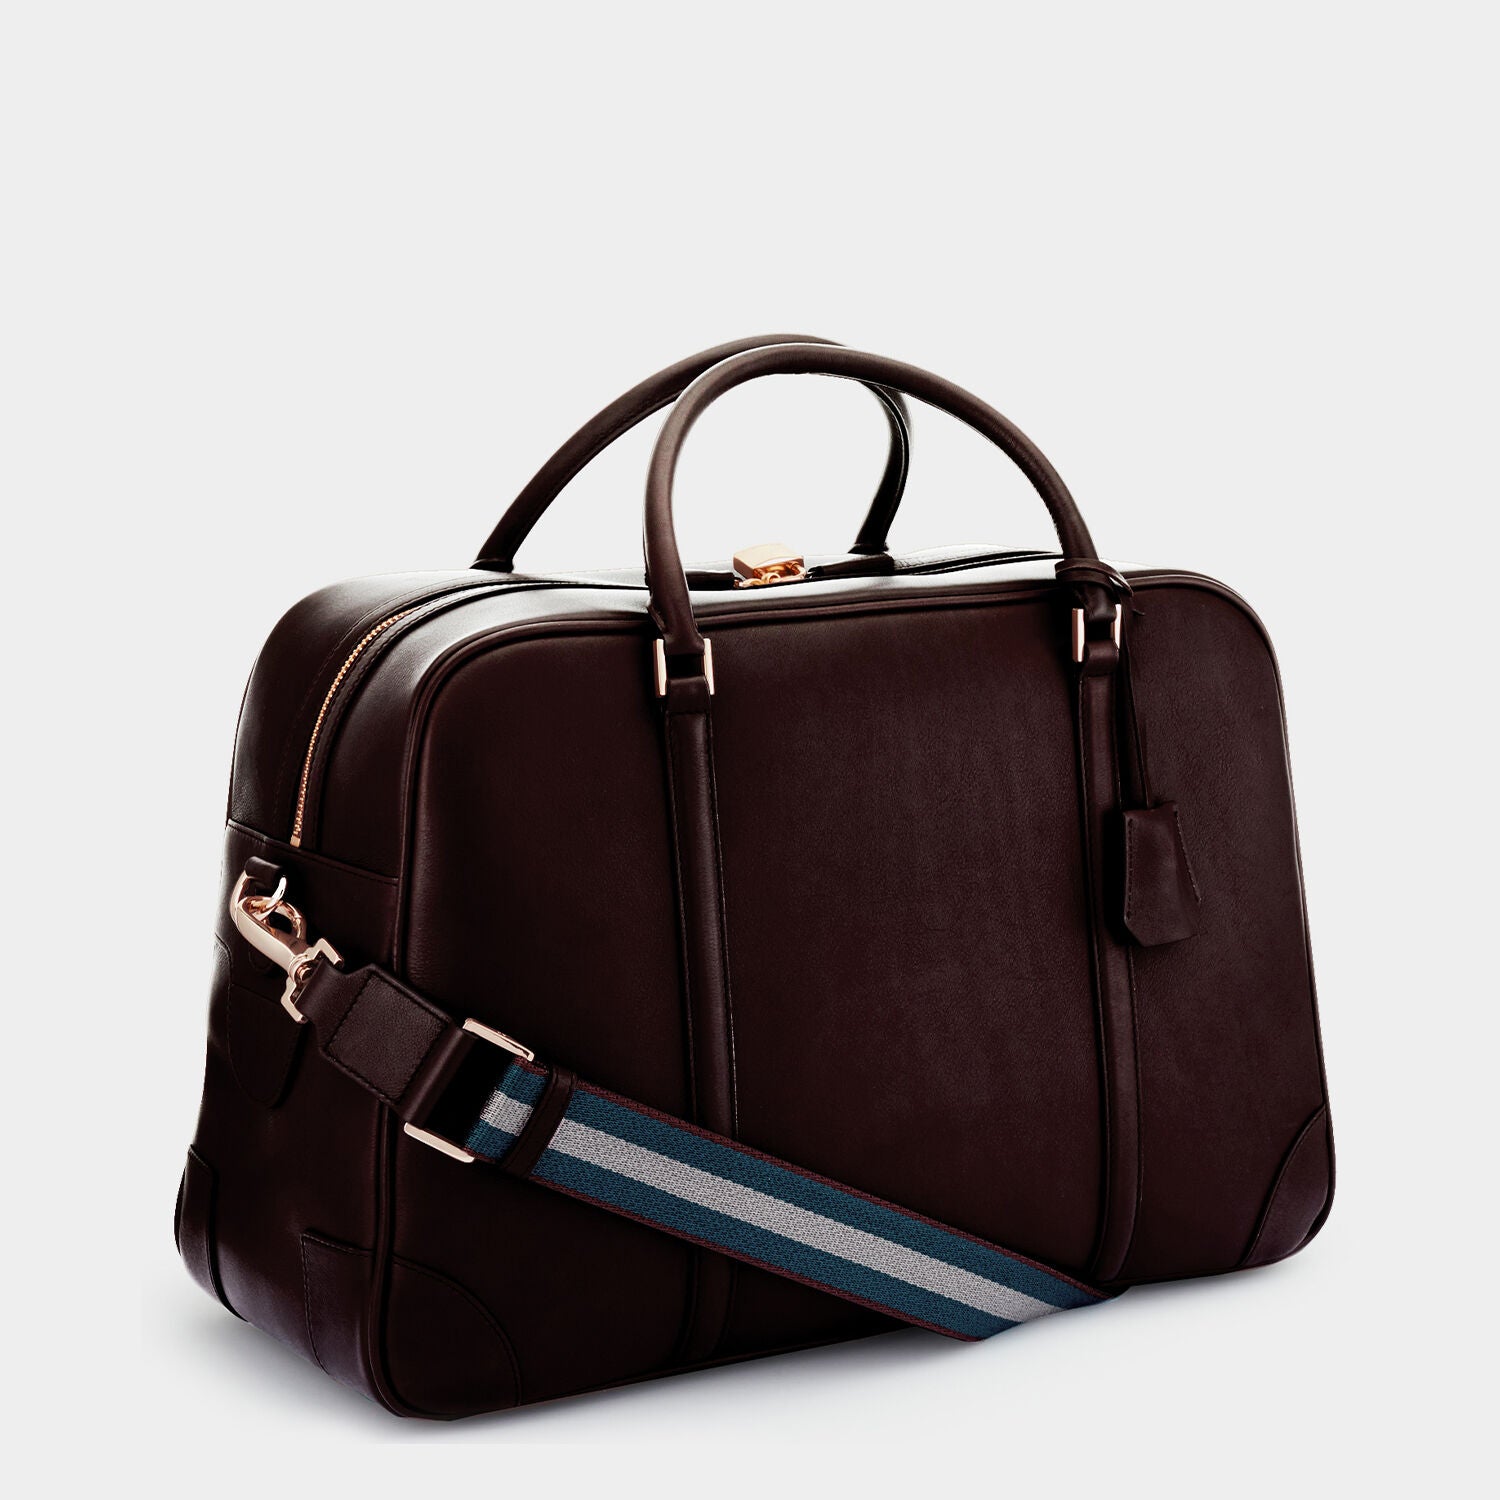 Bespoke Latimer -

                  
                    Butter Leather in Chocolate -
                  

                  Anya Hindmarch UK
